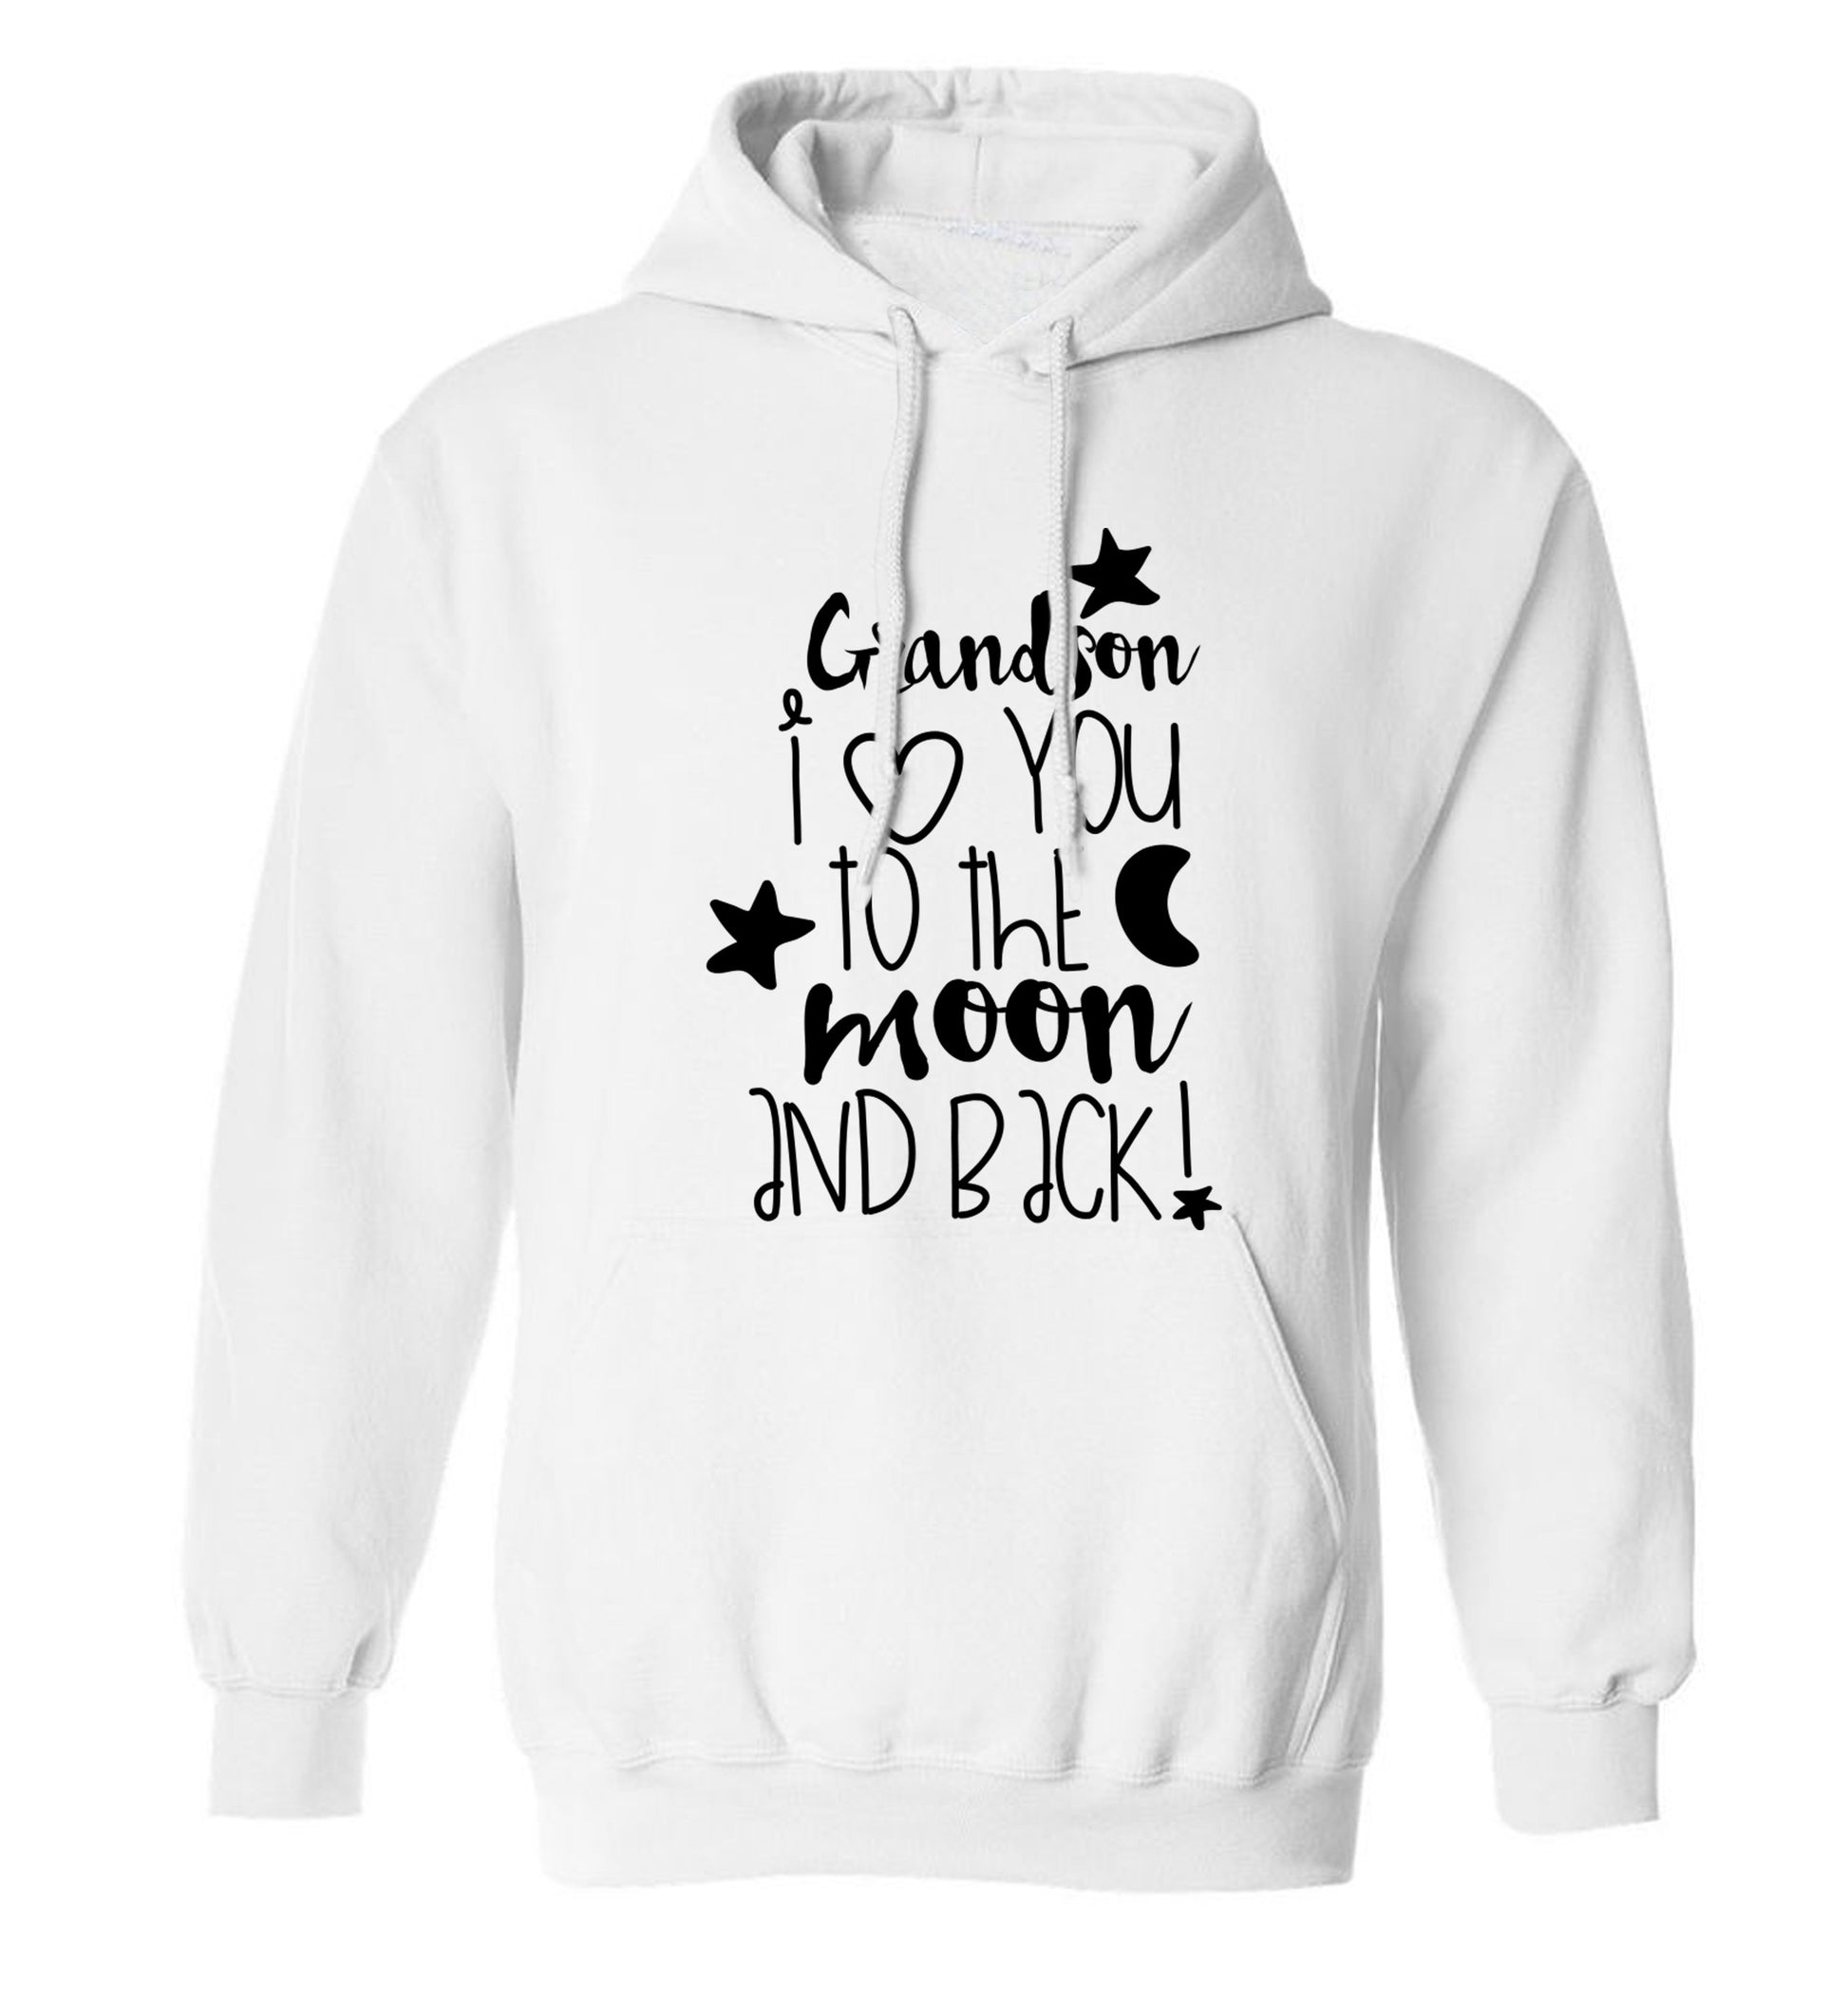 Grandson I love you to the moon and back adults unisex white hoodie 2XL